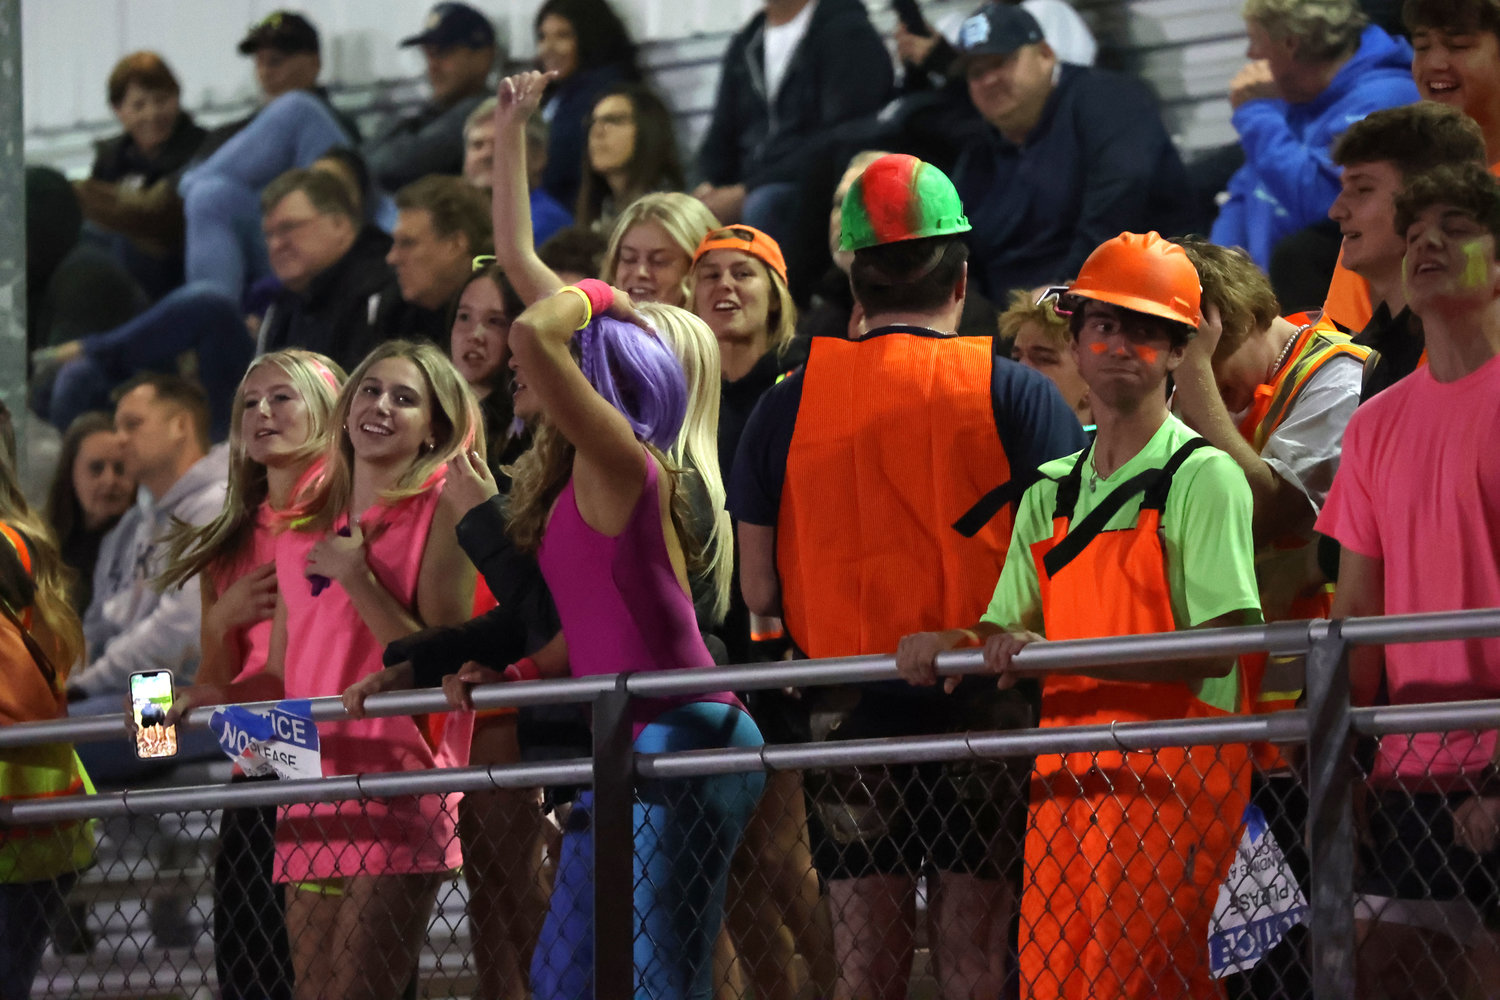 Gig Harbor "construction worker" fans show their joy at their team's victory.